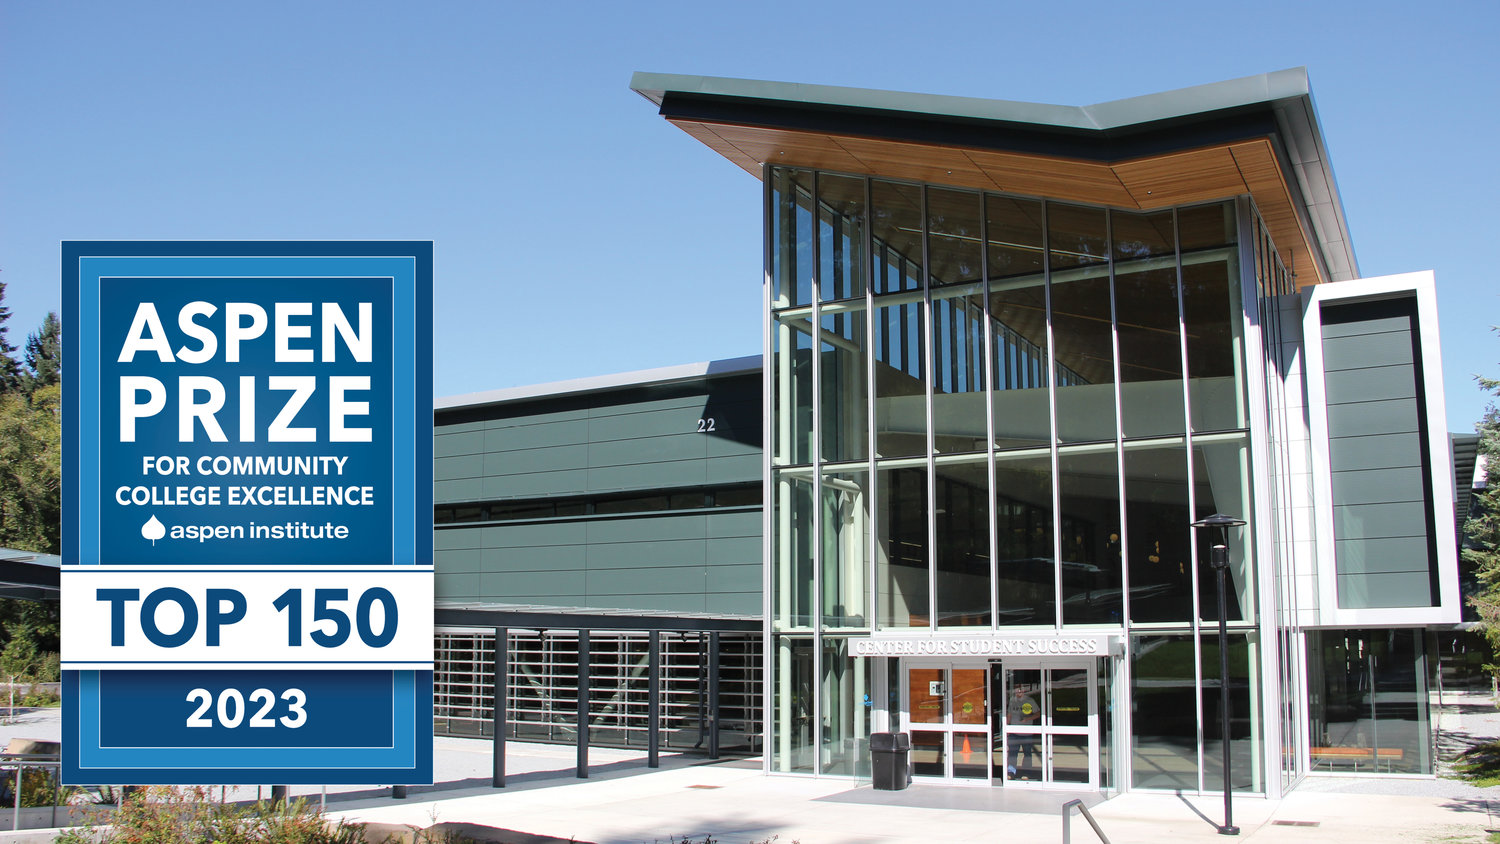 SPSCC is eligible to compete for the $1 million Aspen Prize for Community College Excellence based on Aspen Institute's announcement on Nov. 4, 2021.